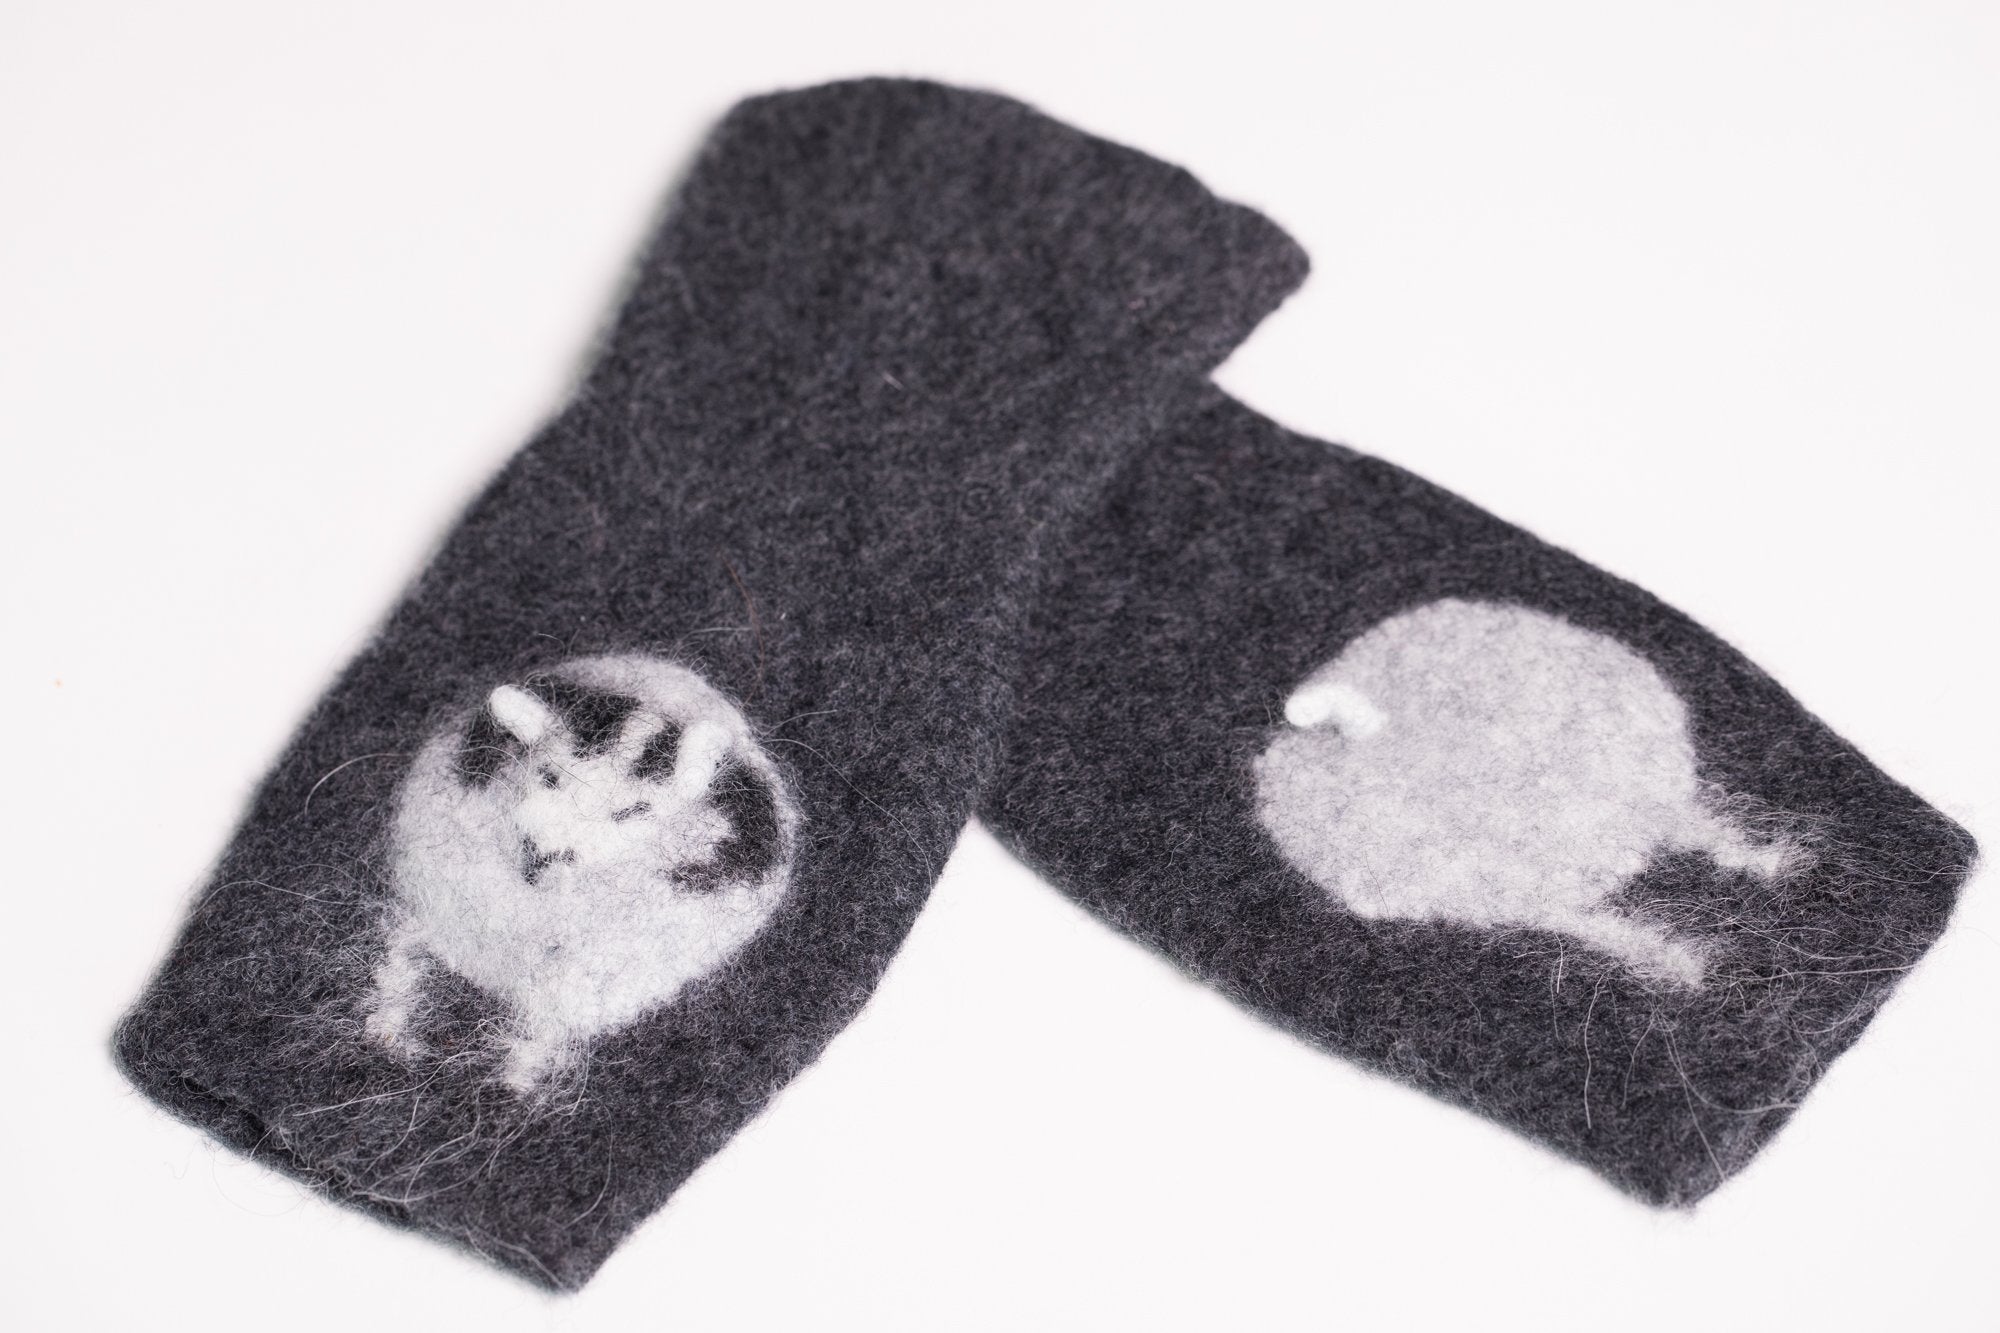 Warm and soft half mittens with cute sheep pattern. Handmade in Iceland. Colour charcoal.